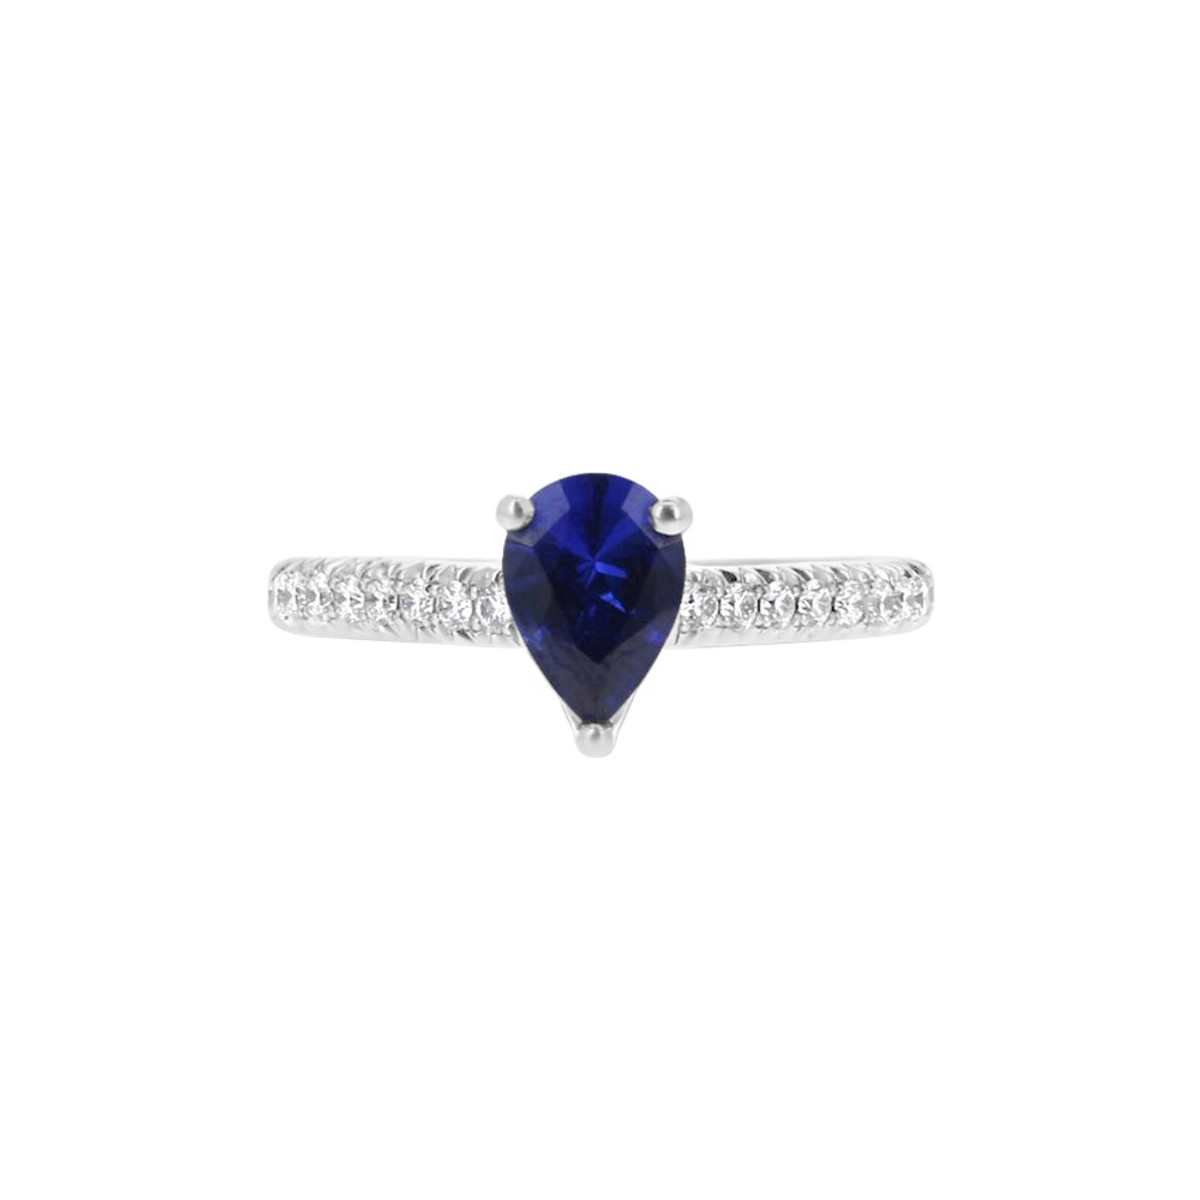 Engage By Hyde Park 18K White Gold 0.97ct Pear Sapphire & Diamond Ring-DCQTS0256